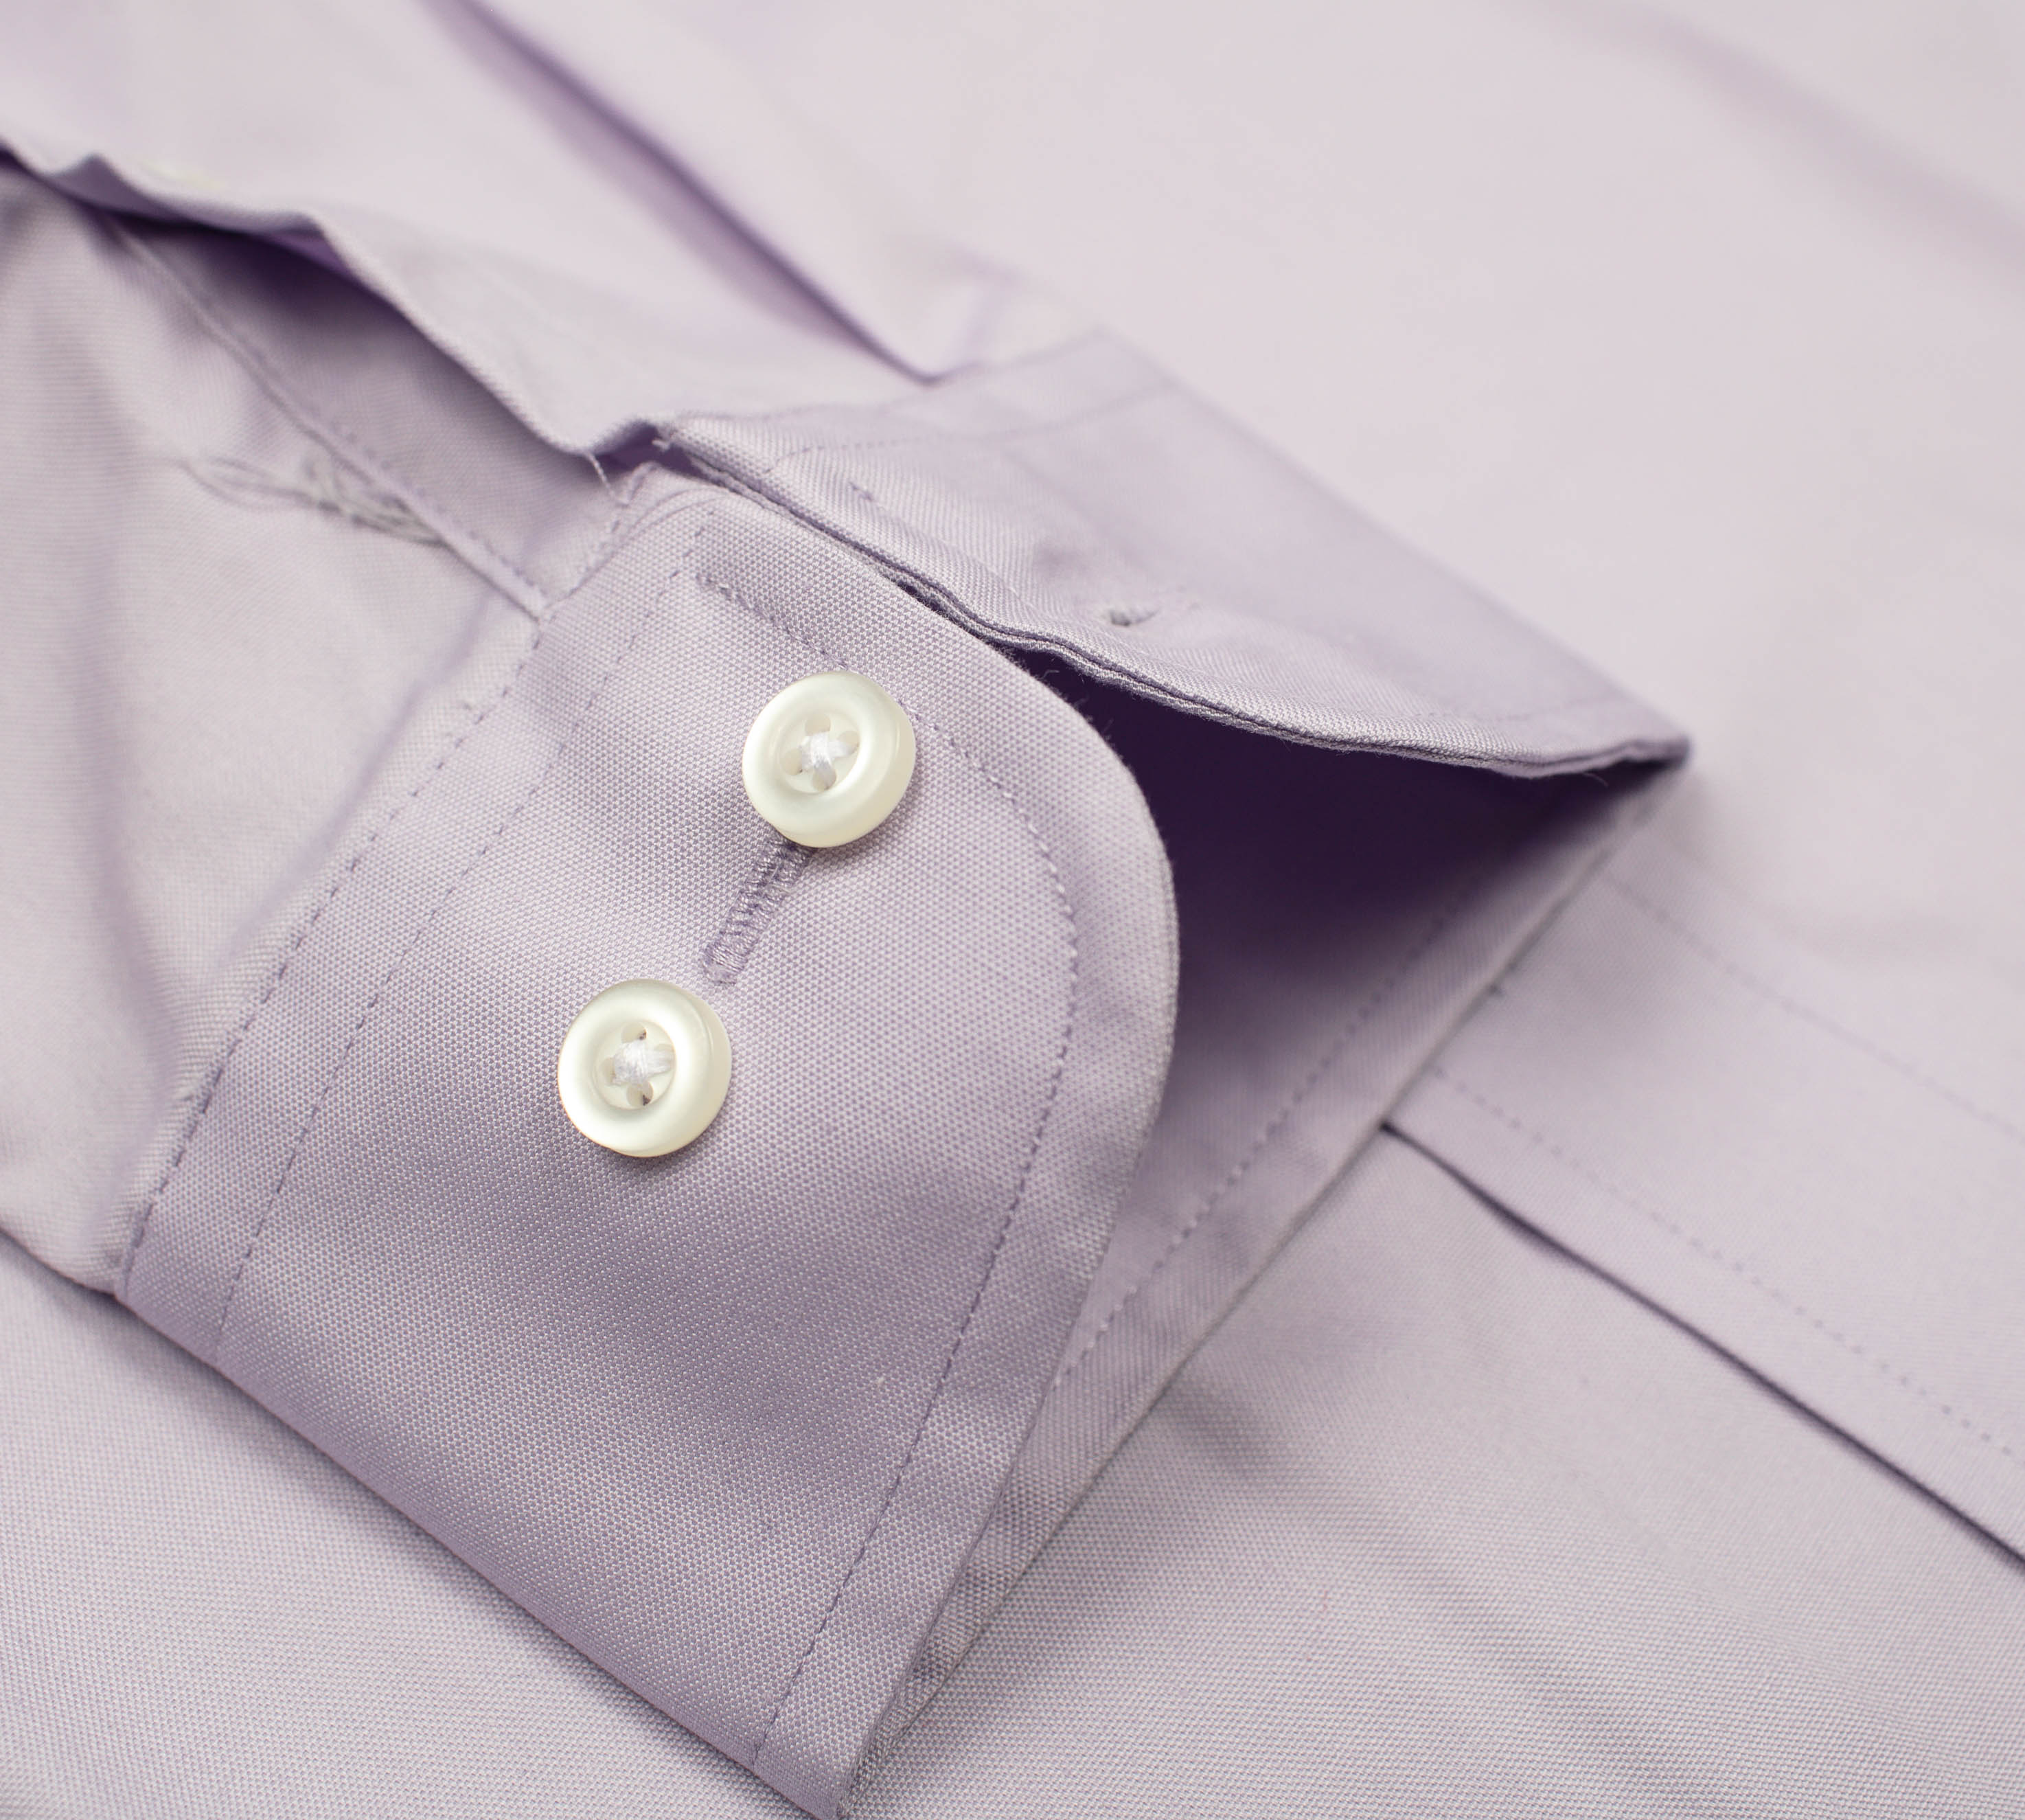 133 ZZ TF SC - Thomas Dylan Lavender Tailored Fit Spread Collar